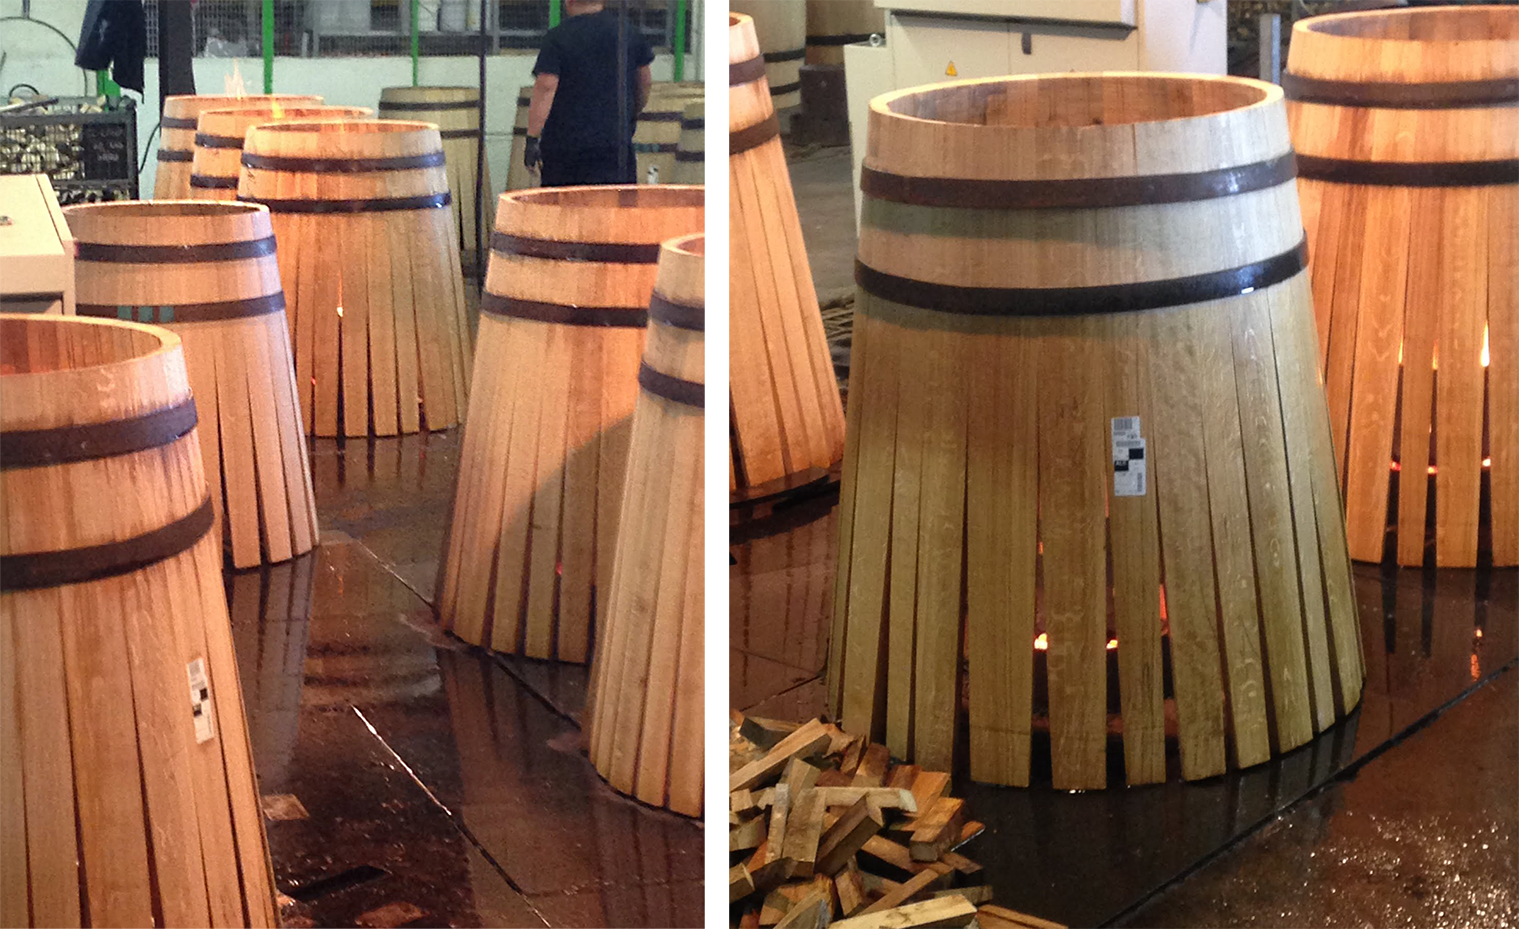 Left: partially shaped barrels being fired at a cooperage; Right: a close up of a partially shaped barrel sitting over a flame